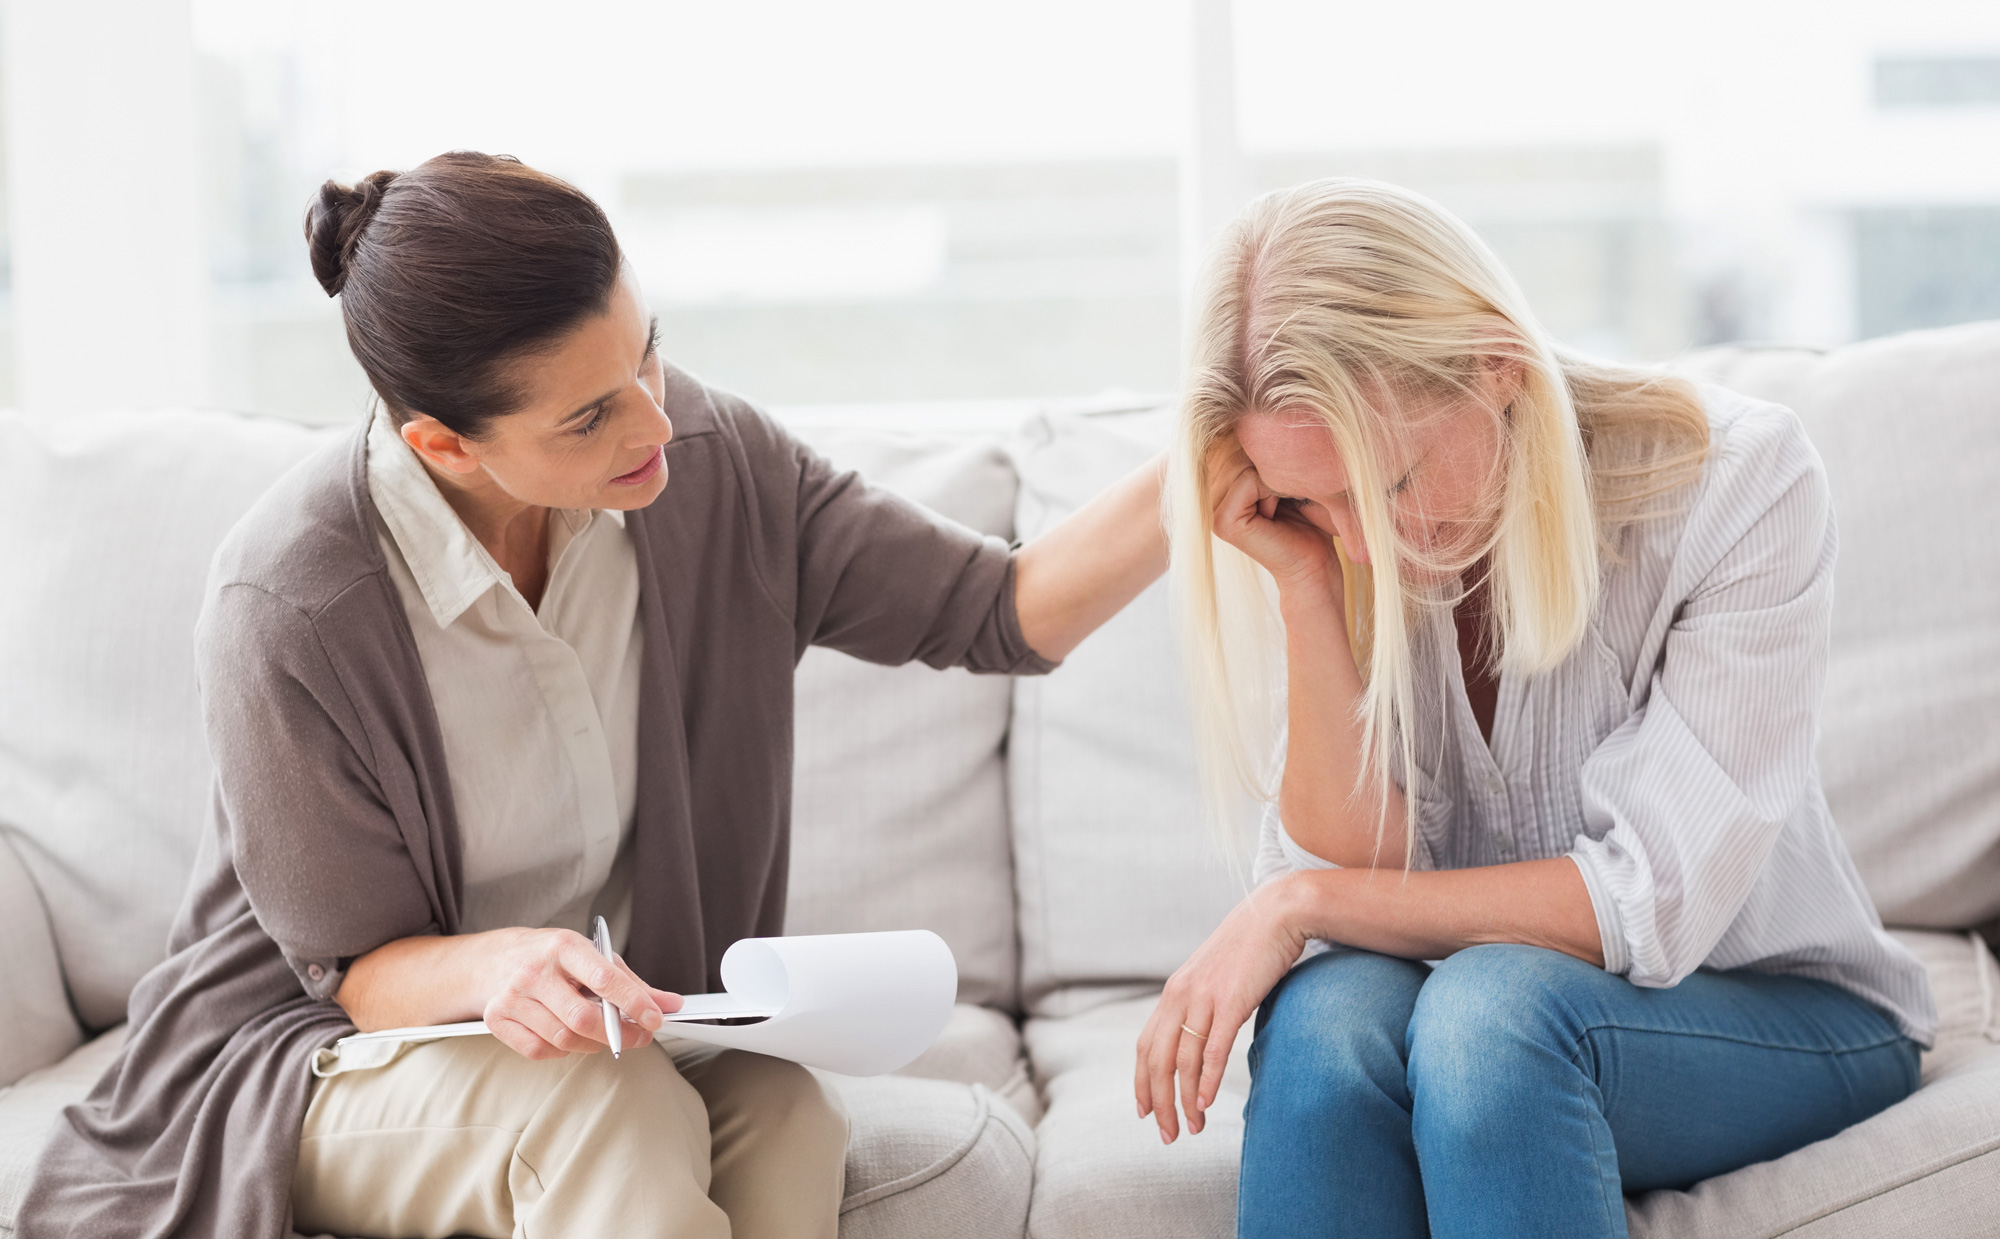 psychotherapy and counselling sydney